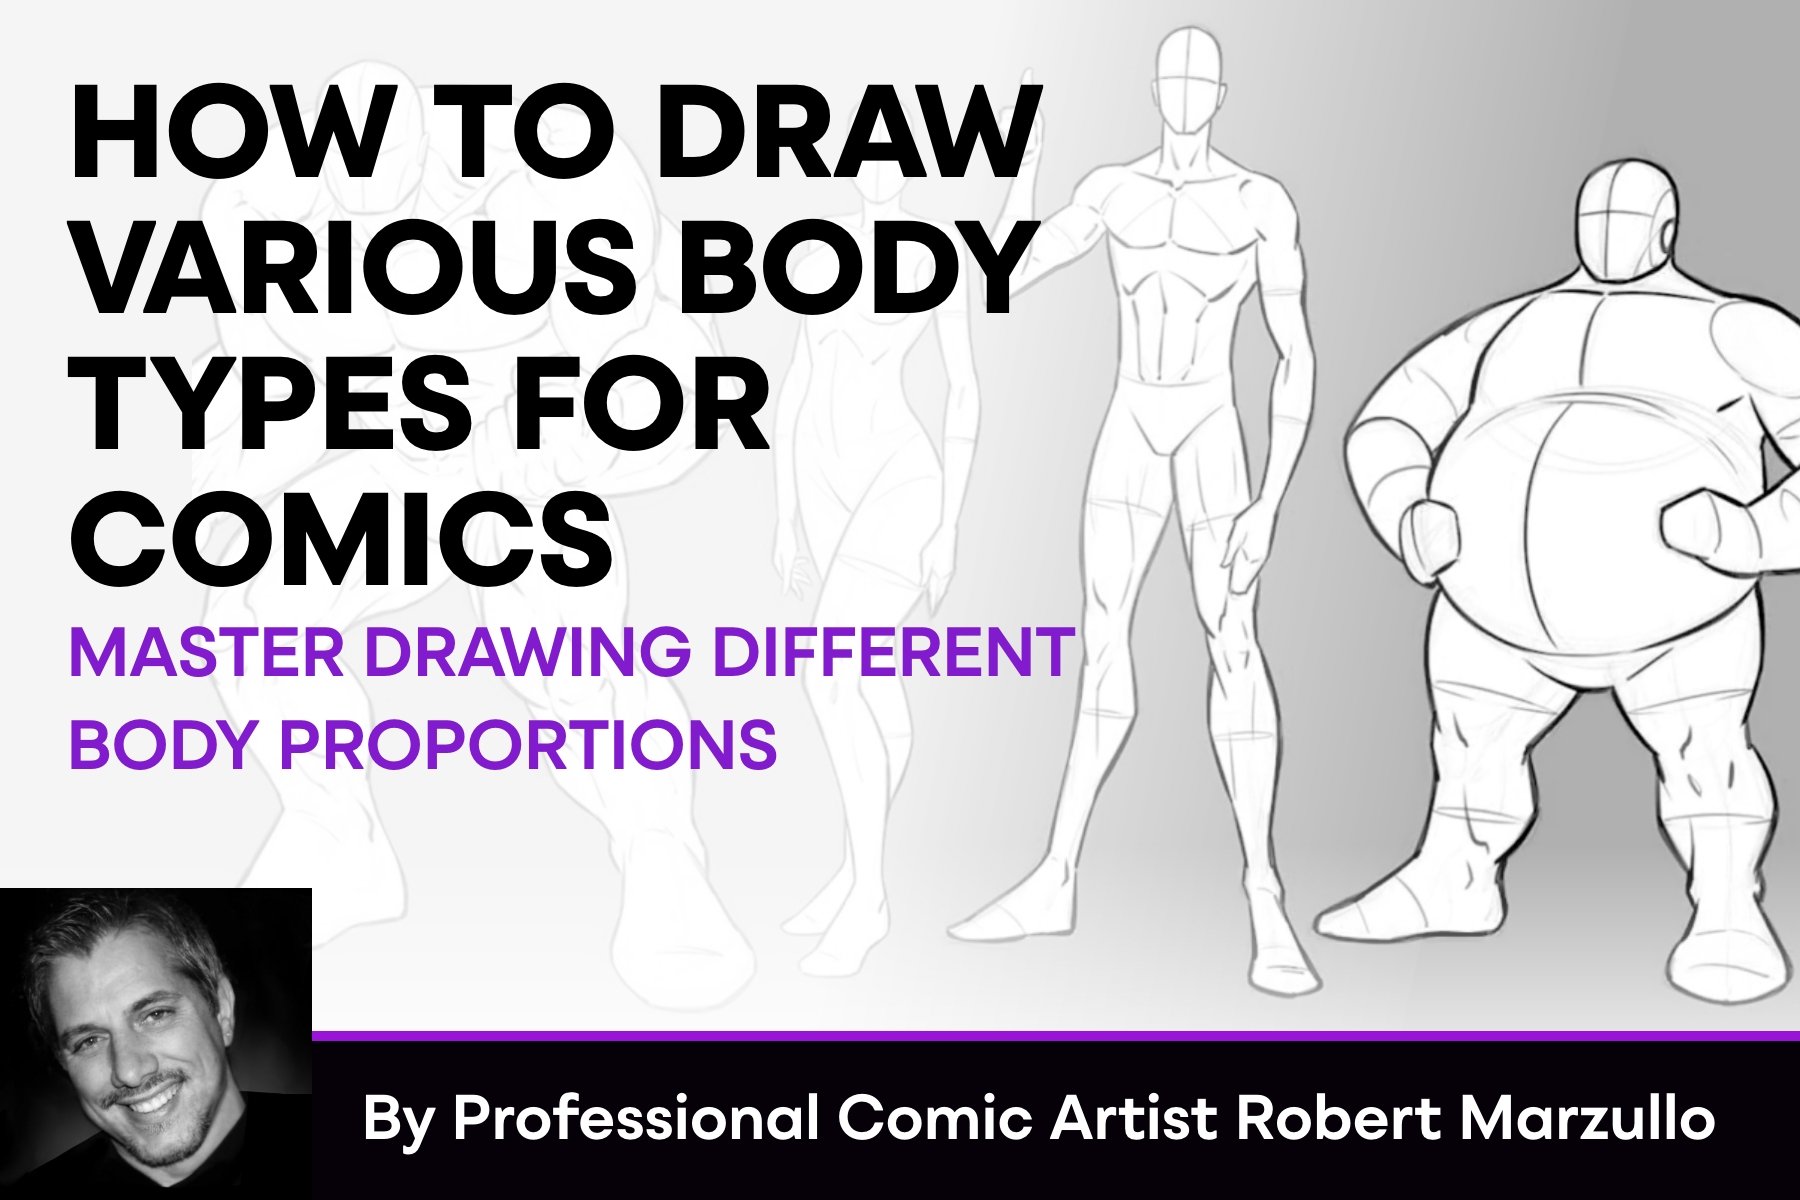 How to Draw Various Body Types and Proportions for Comics